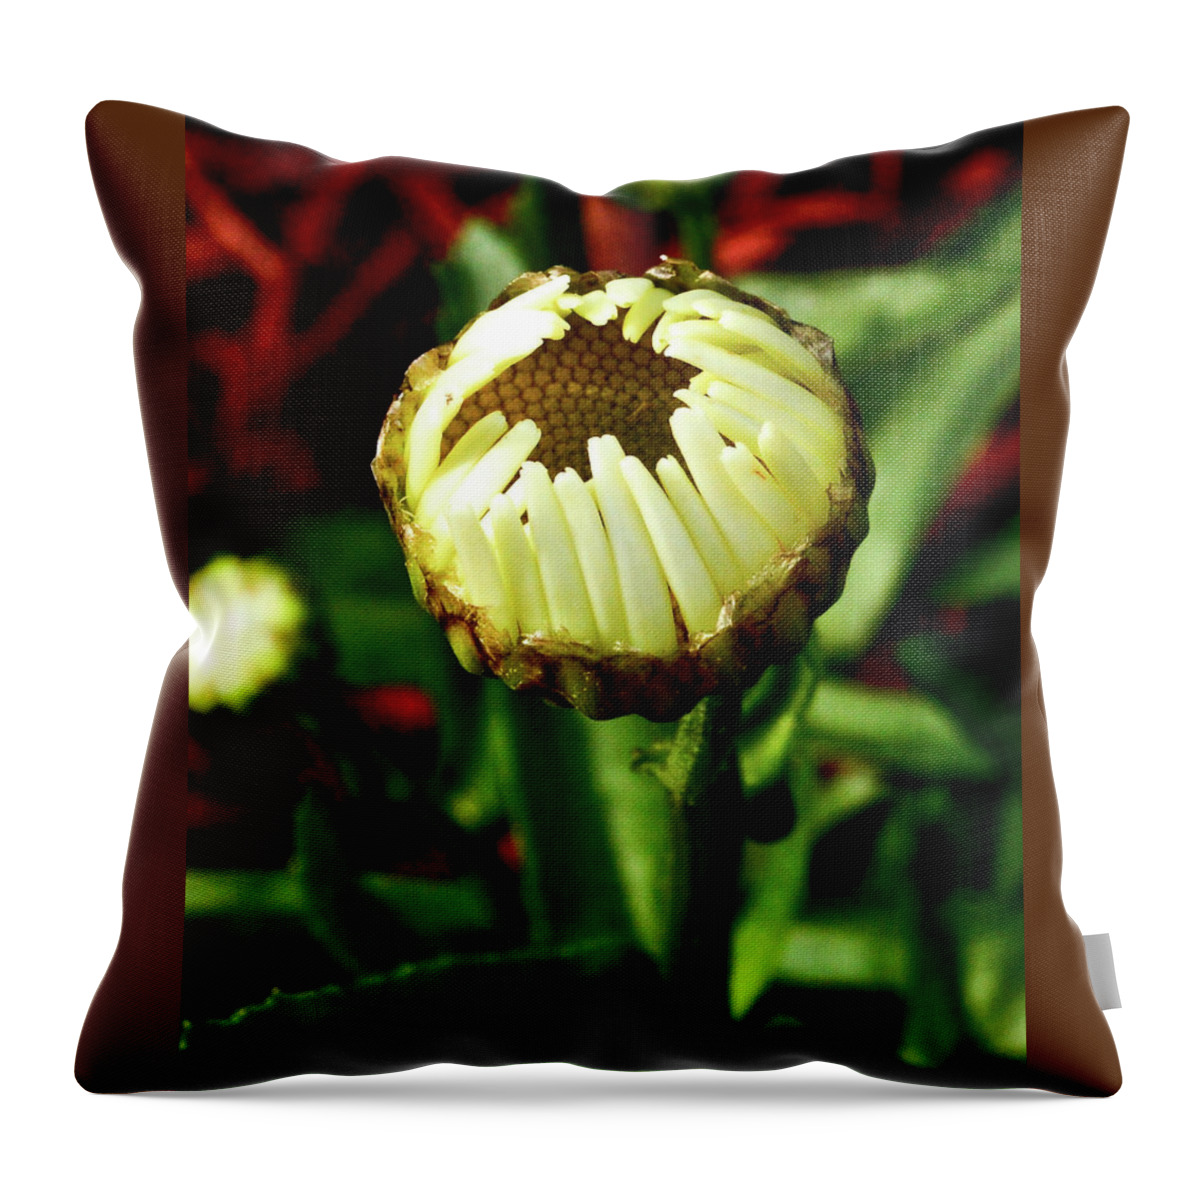 Daisy Throw Pillow featuring the photograph Baby Daisy by Susie Loechler